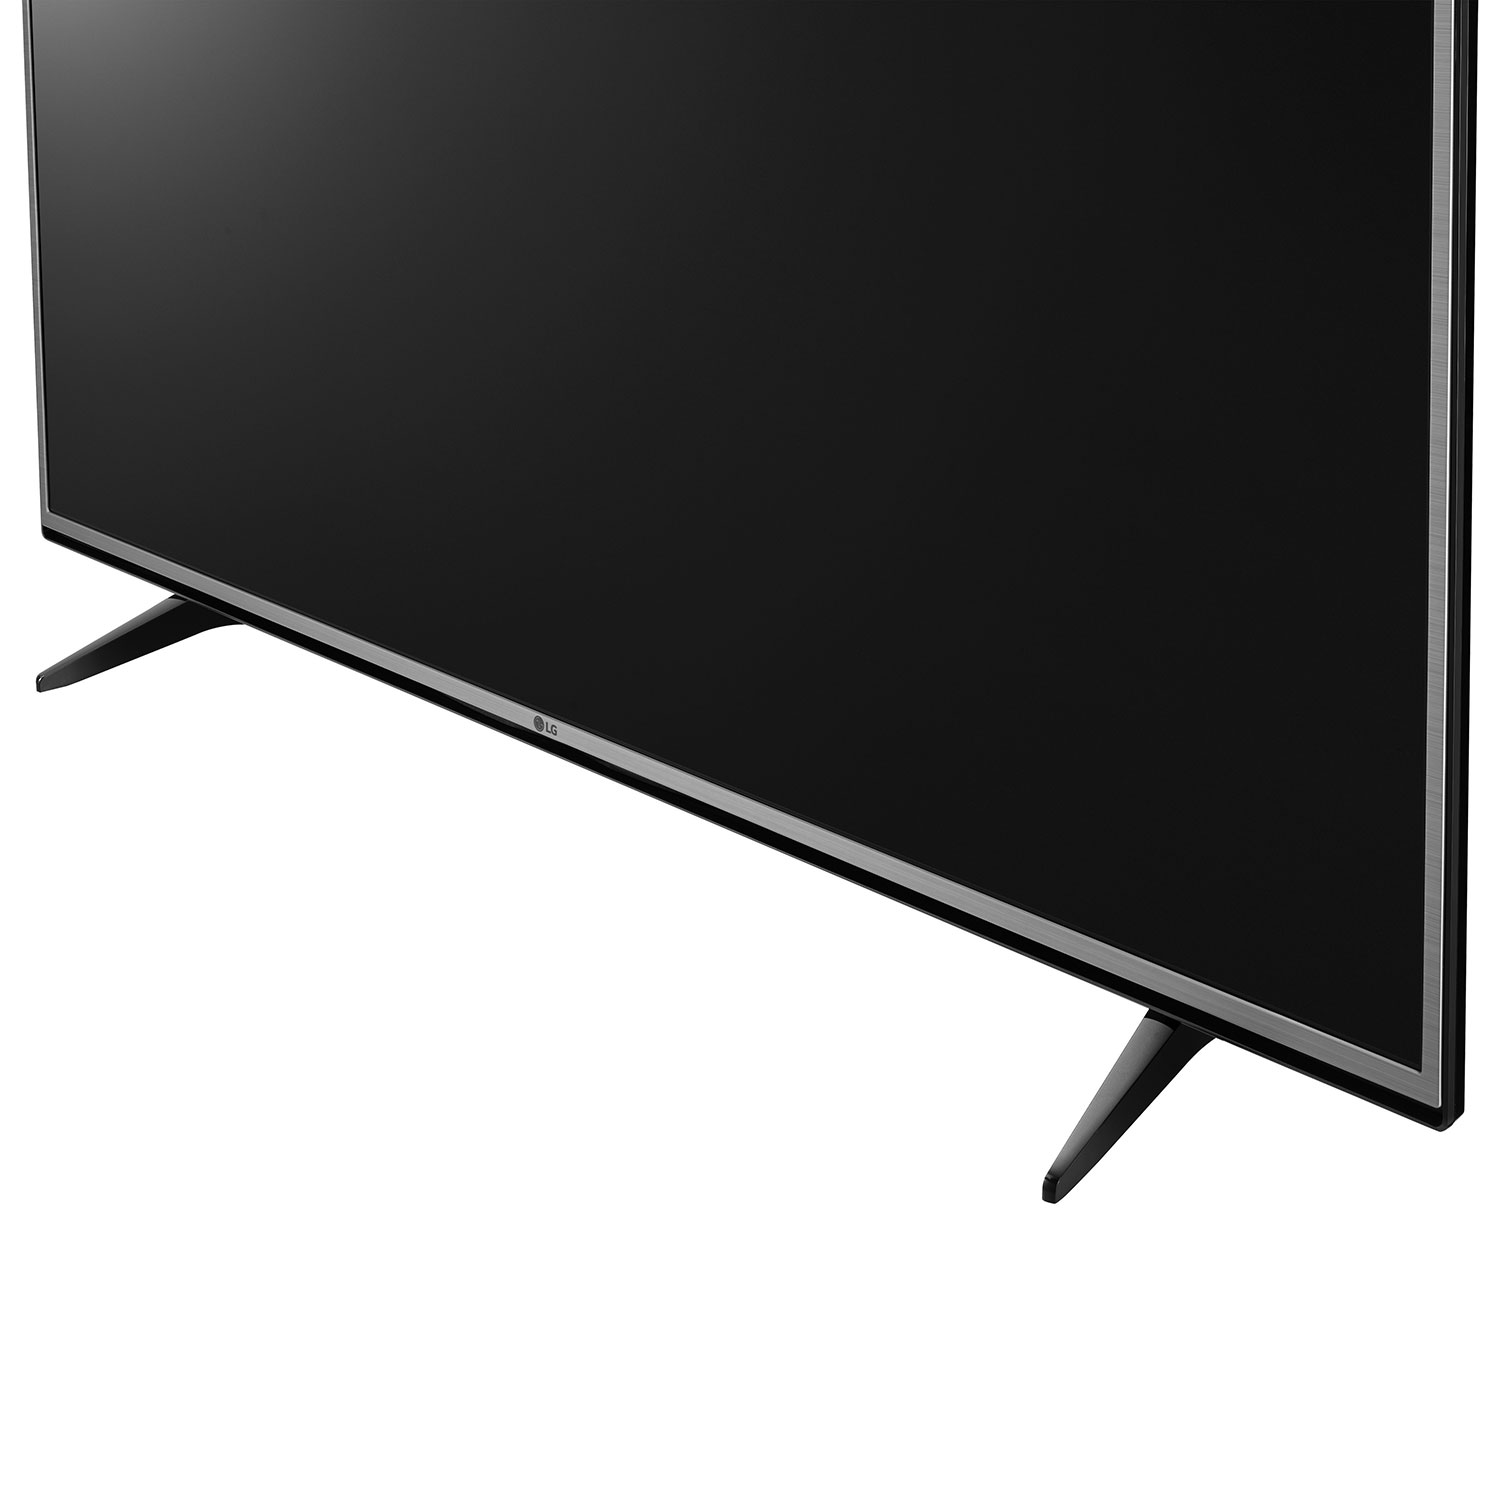 What are some positively reviewed LG televisions?